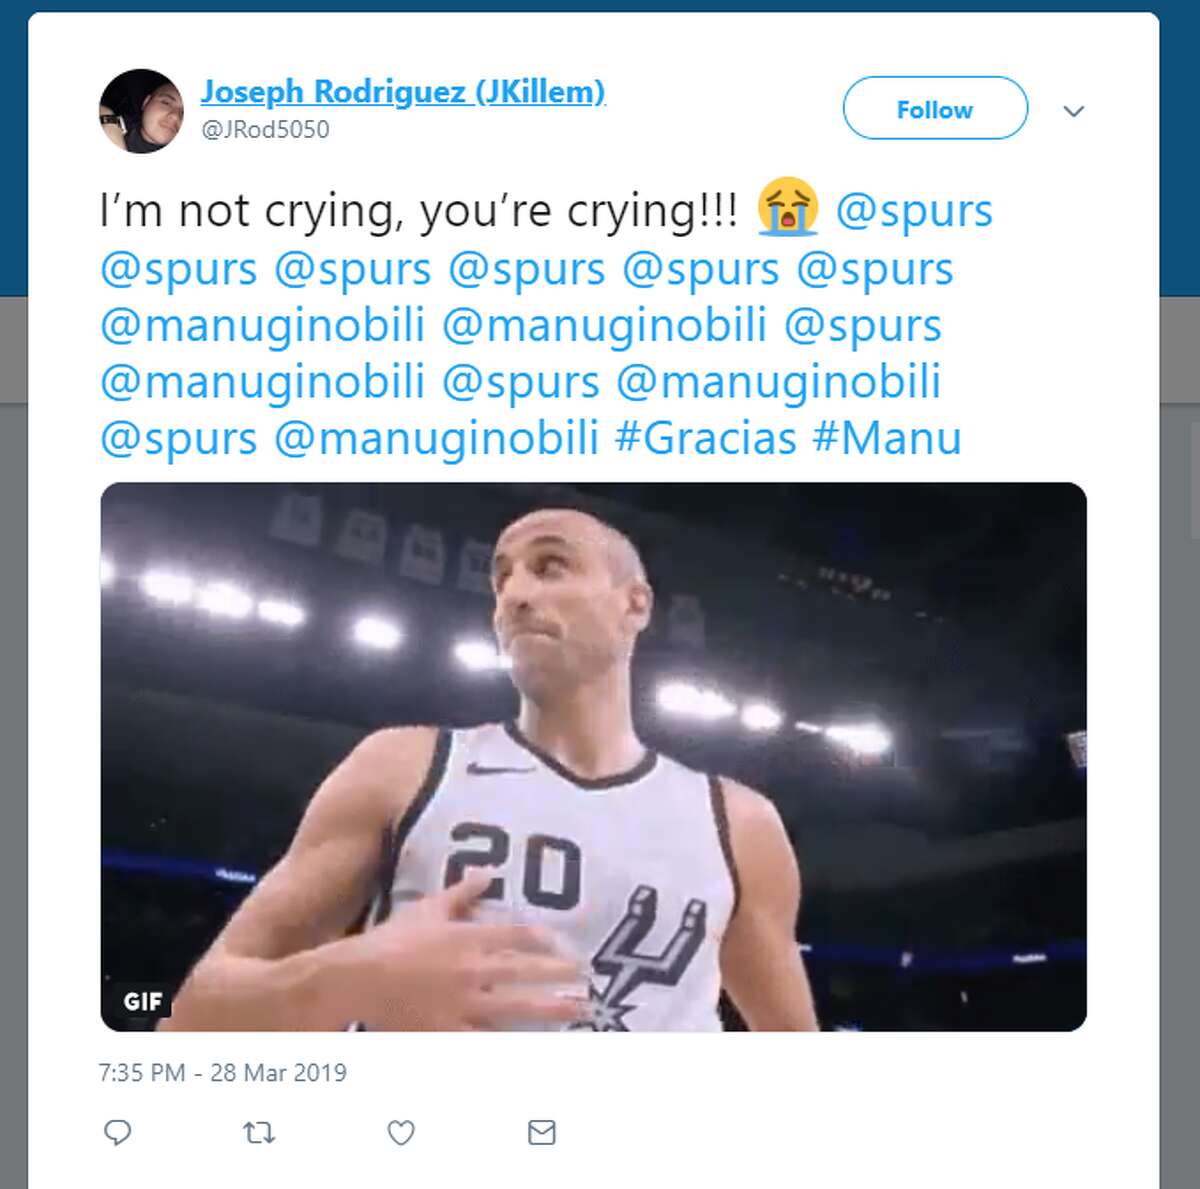 Fans shared appreciation for Manu Ginobili, shared photos of Big Three sightings during the game and Ginobili's retirement ceremony.